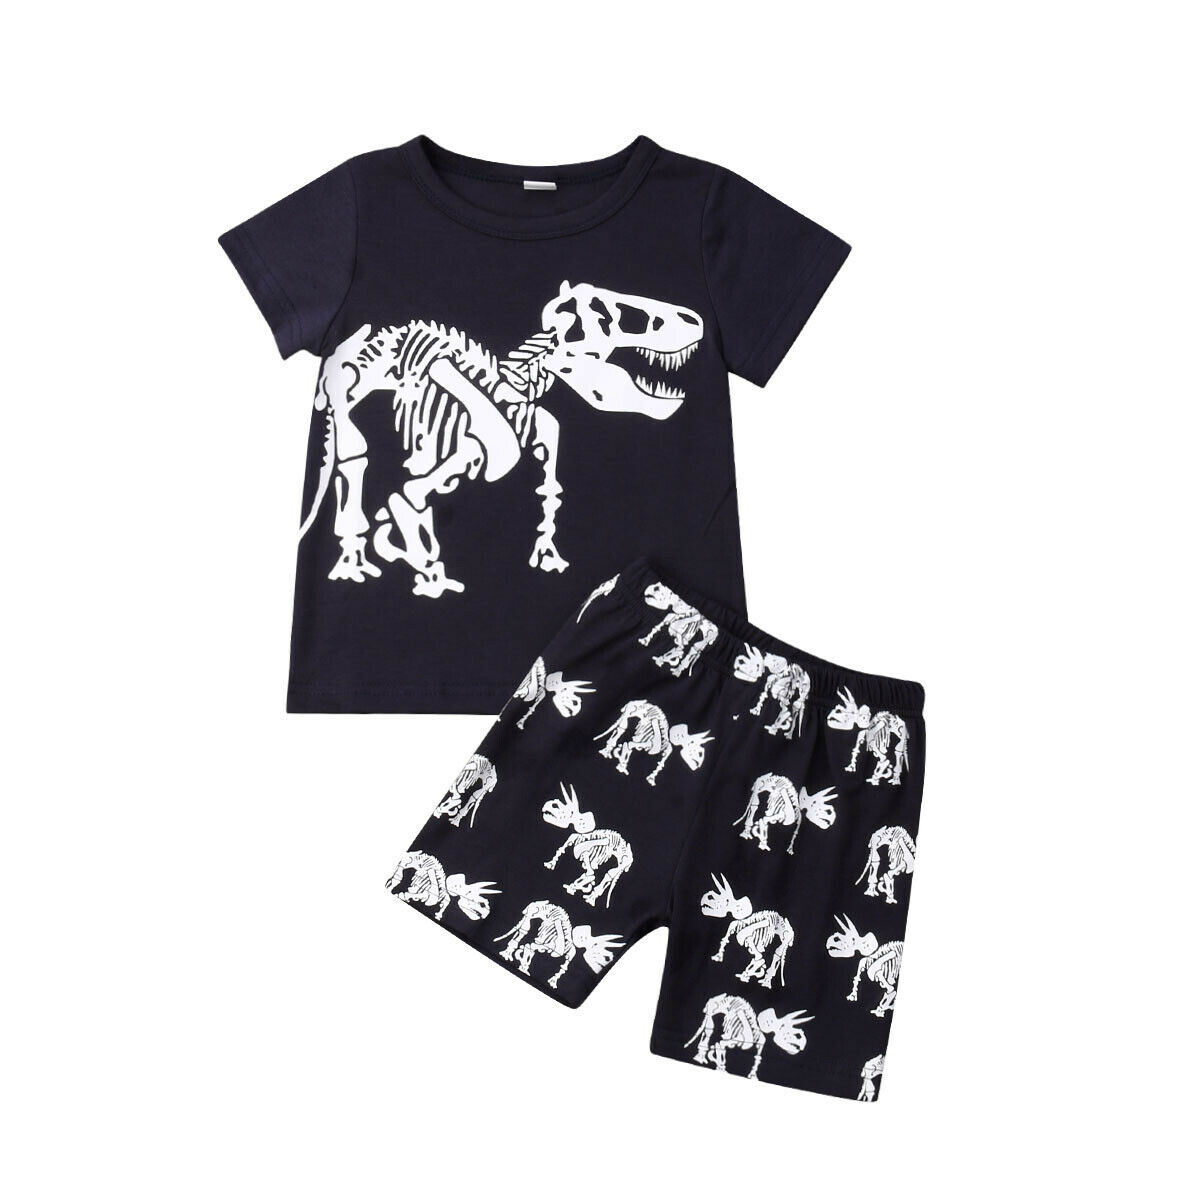 2021 Kid Little Boys Summer Outfit Dinosaur Short Sleeve with Shorts Clothes - image 1 of 5